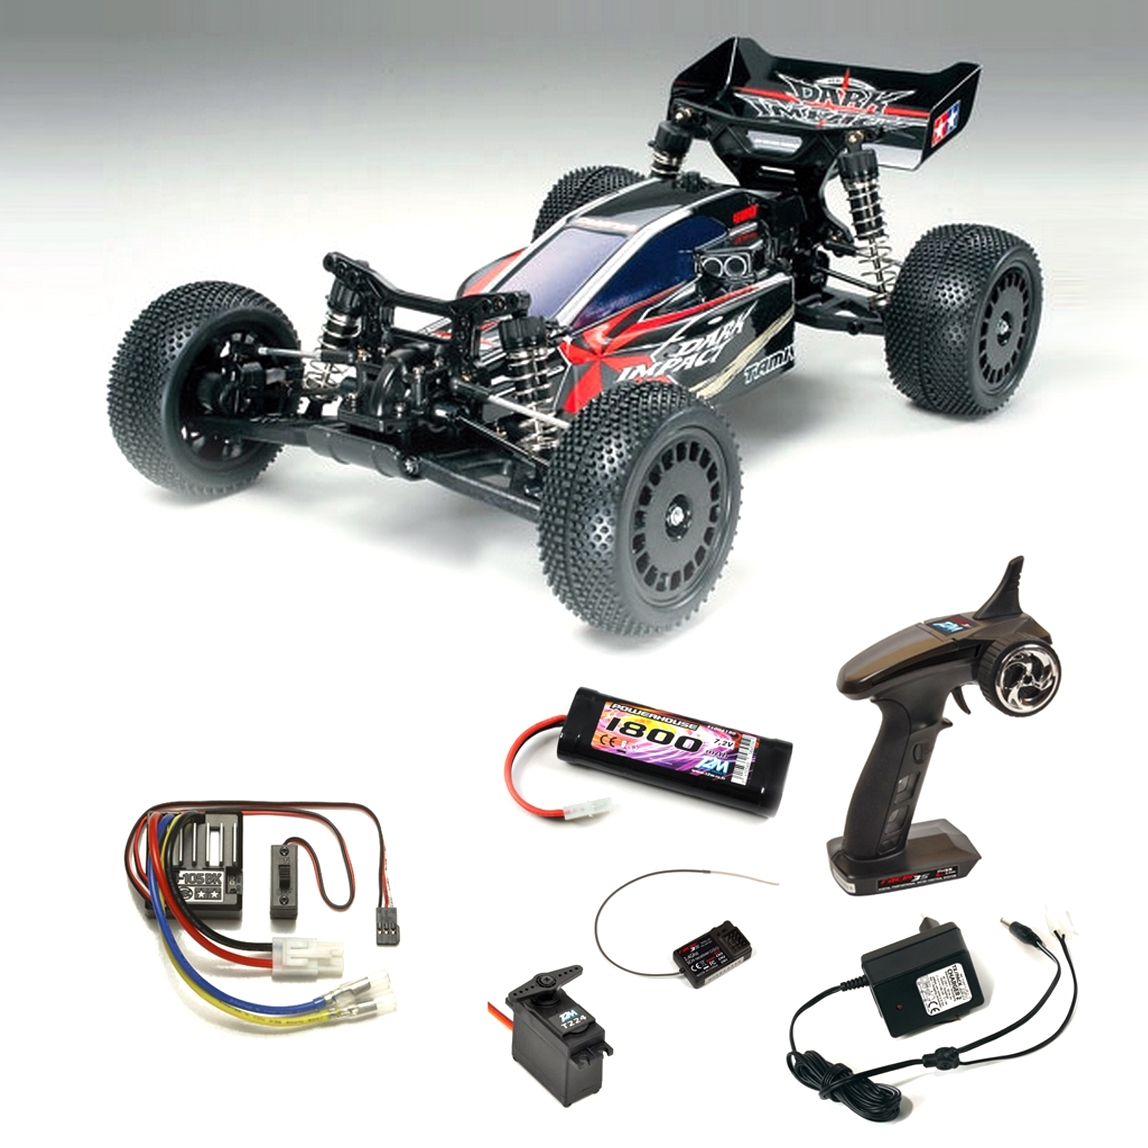 Tamiya Dark Impact brushed 1:10 Auto RC électrique Buggy 4 roues